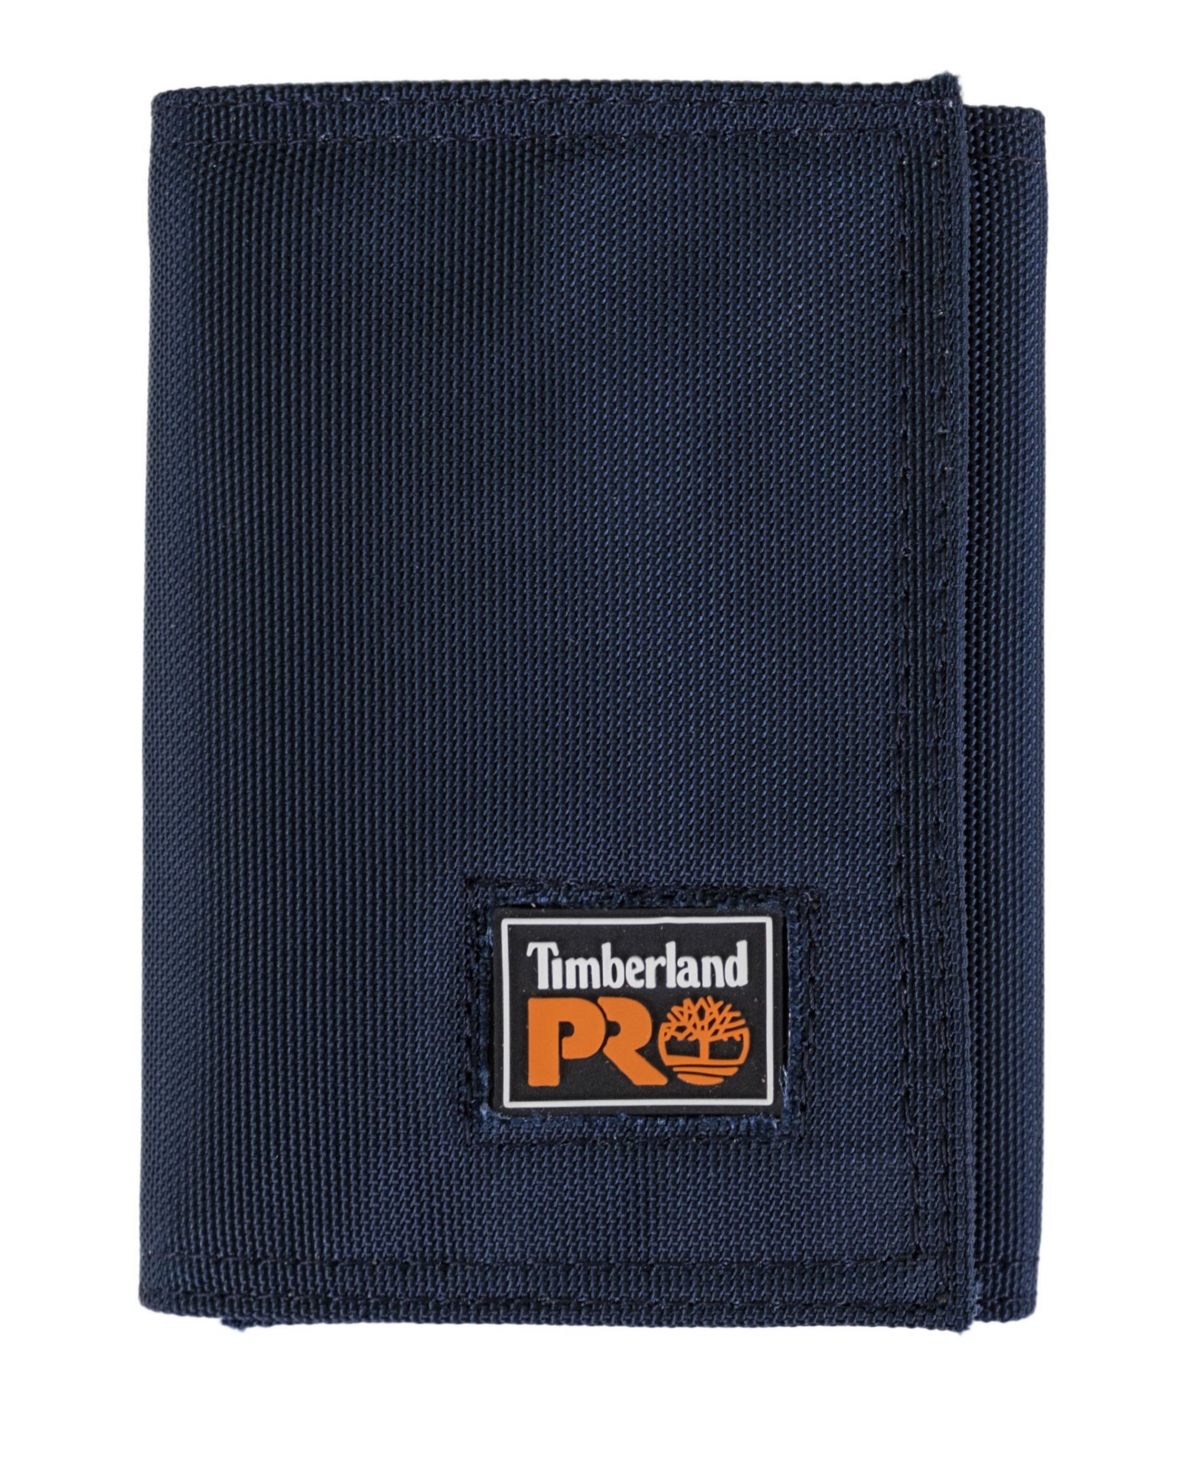 Timberland Pro Men's Heavy Duty Fabric Trifold Wallet In Navy